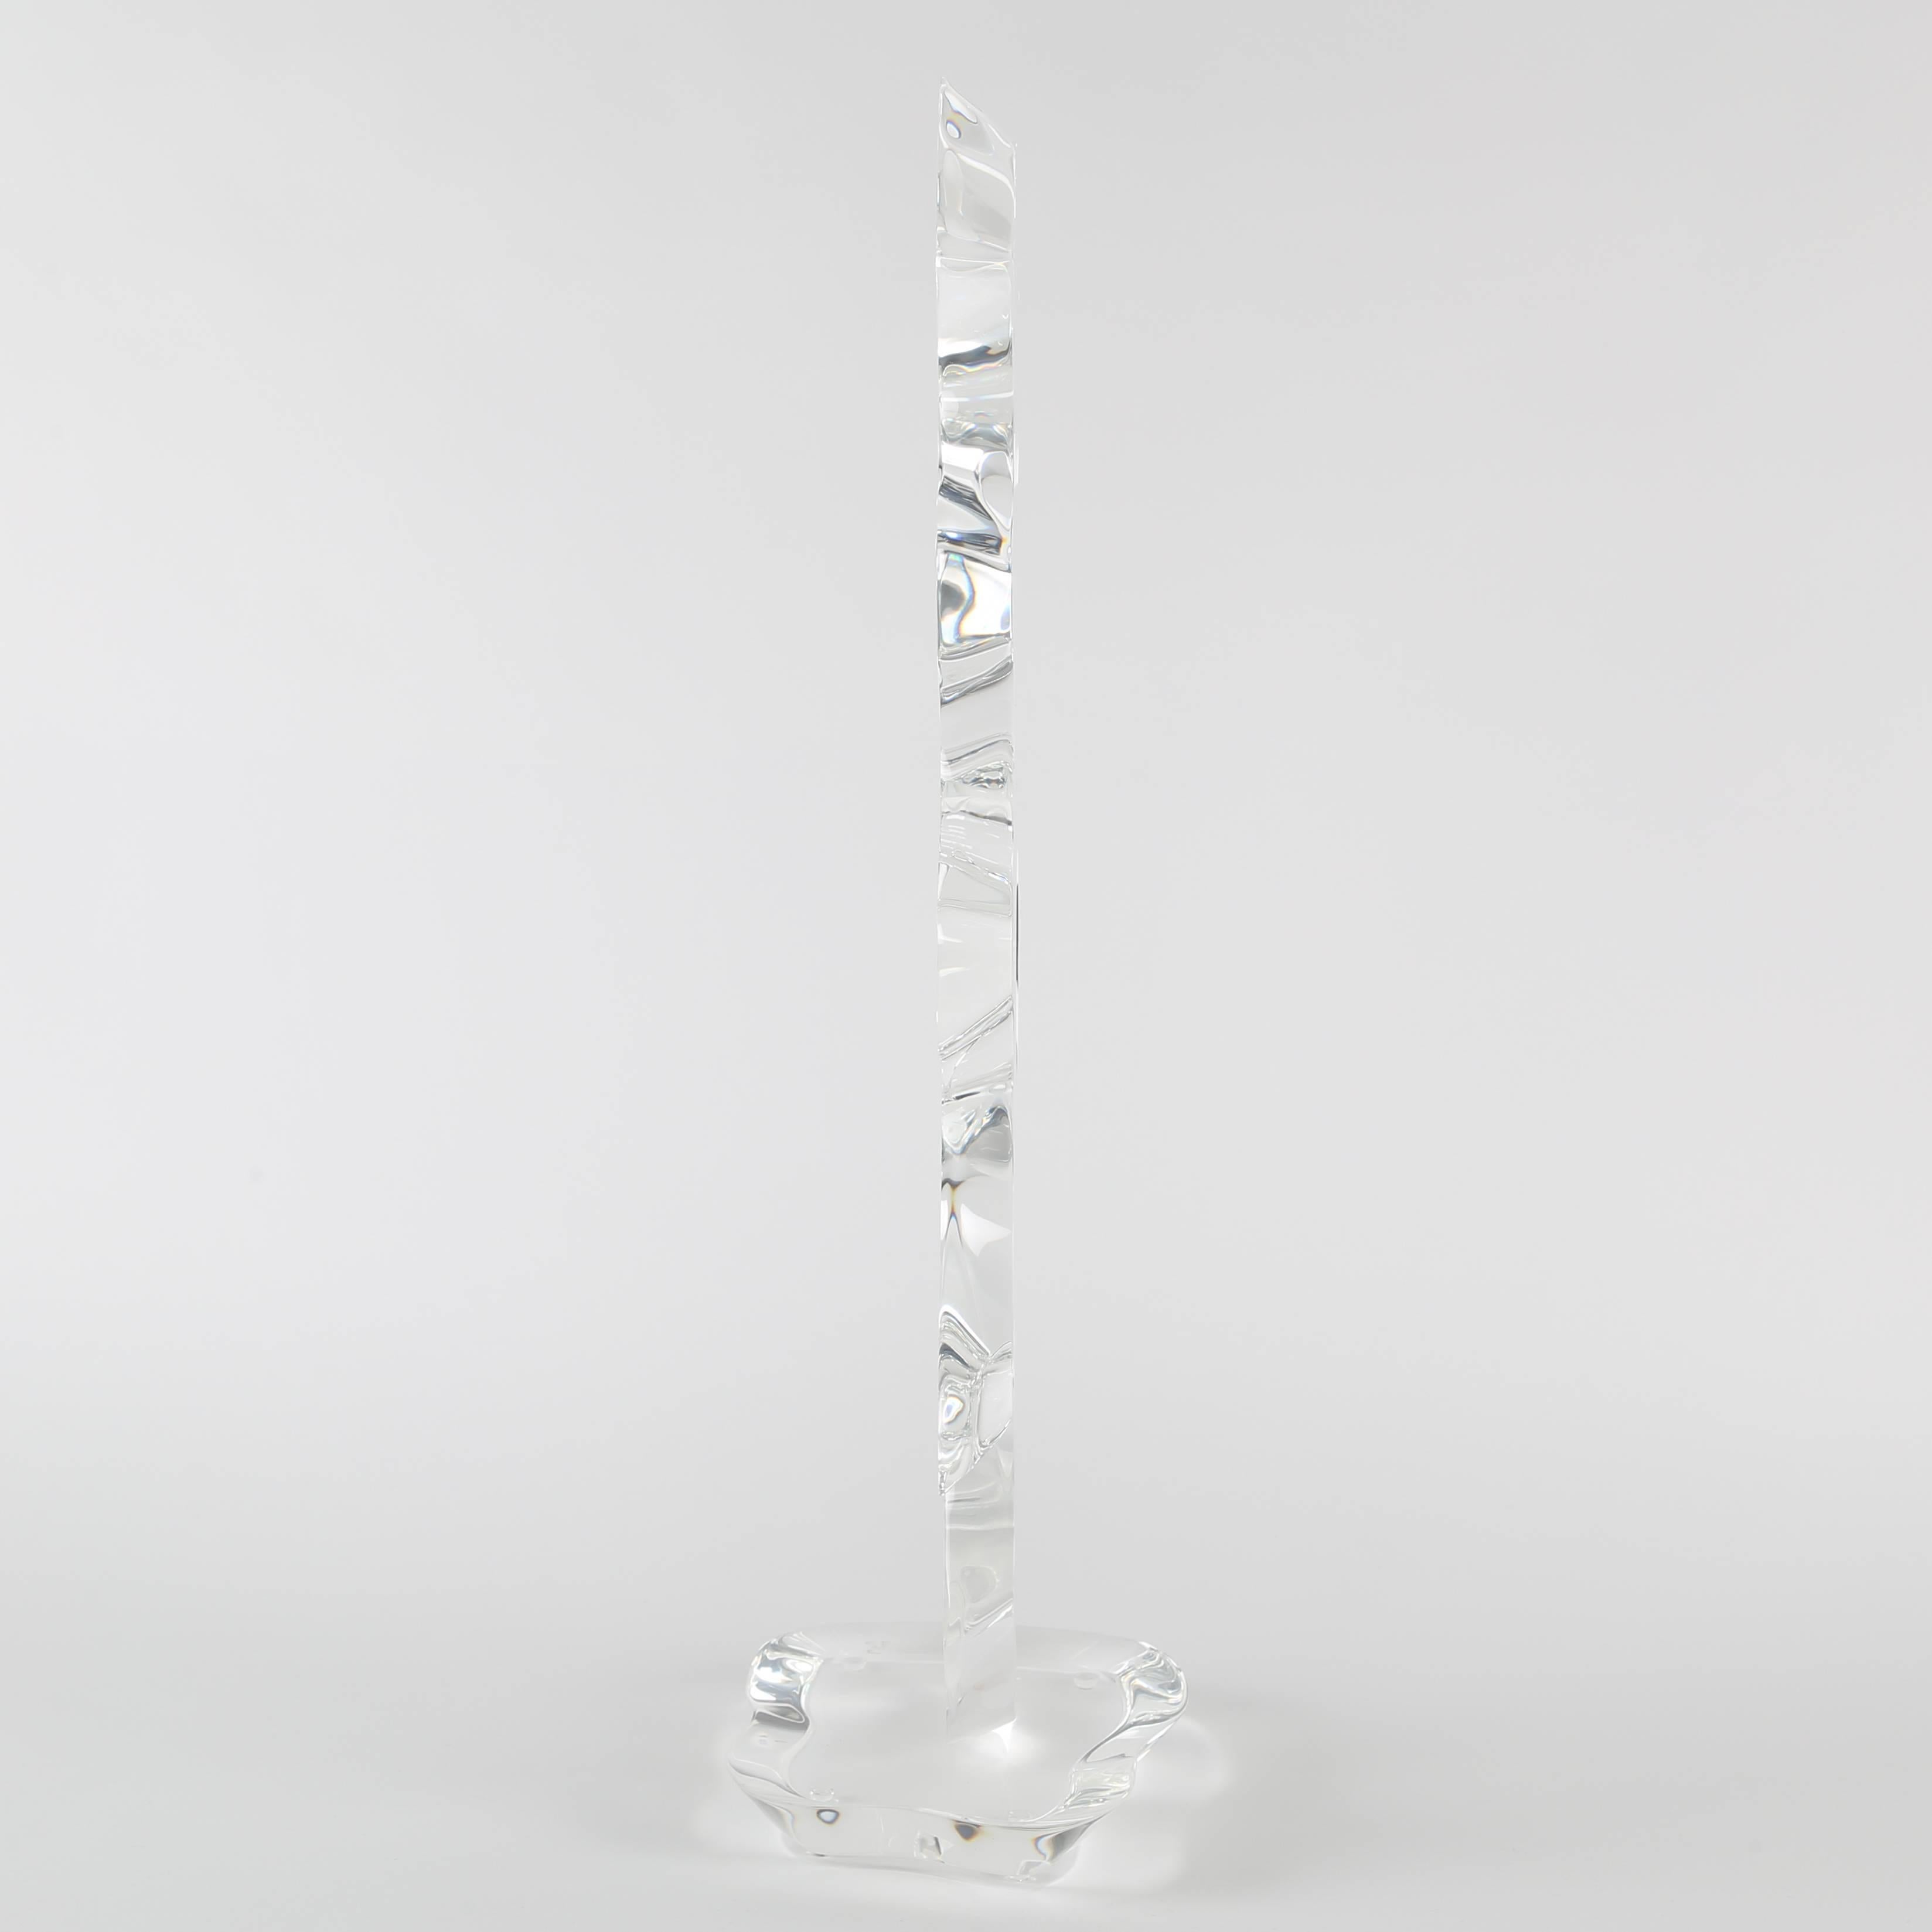 Polished Abstract Lucite Sculpture by Hivo Van Teal, circa 1970s For Sale